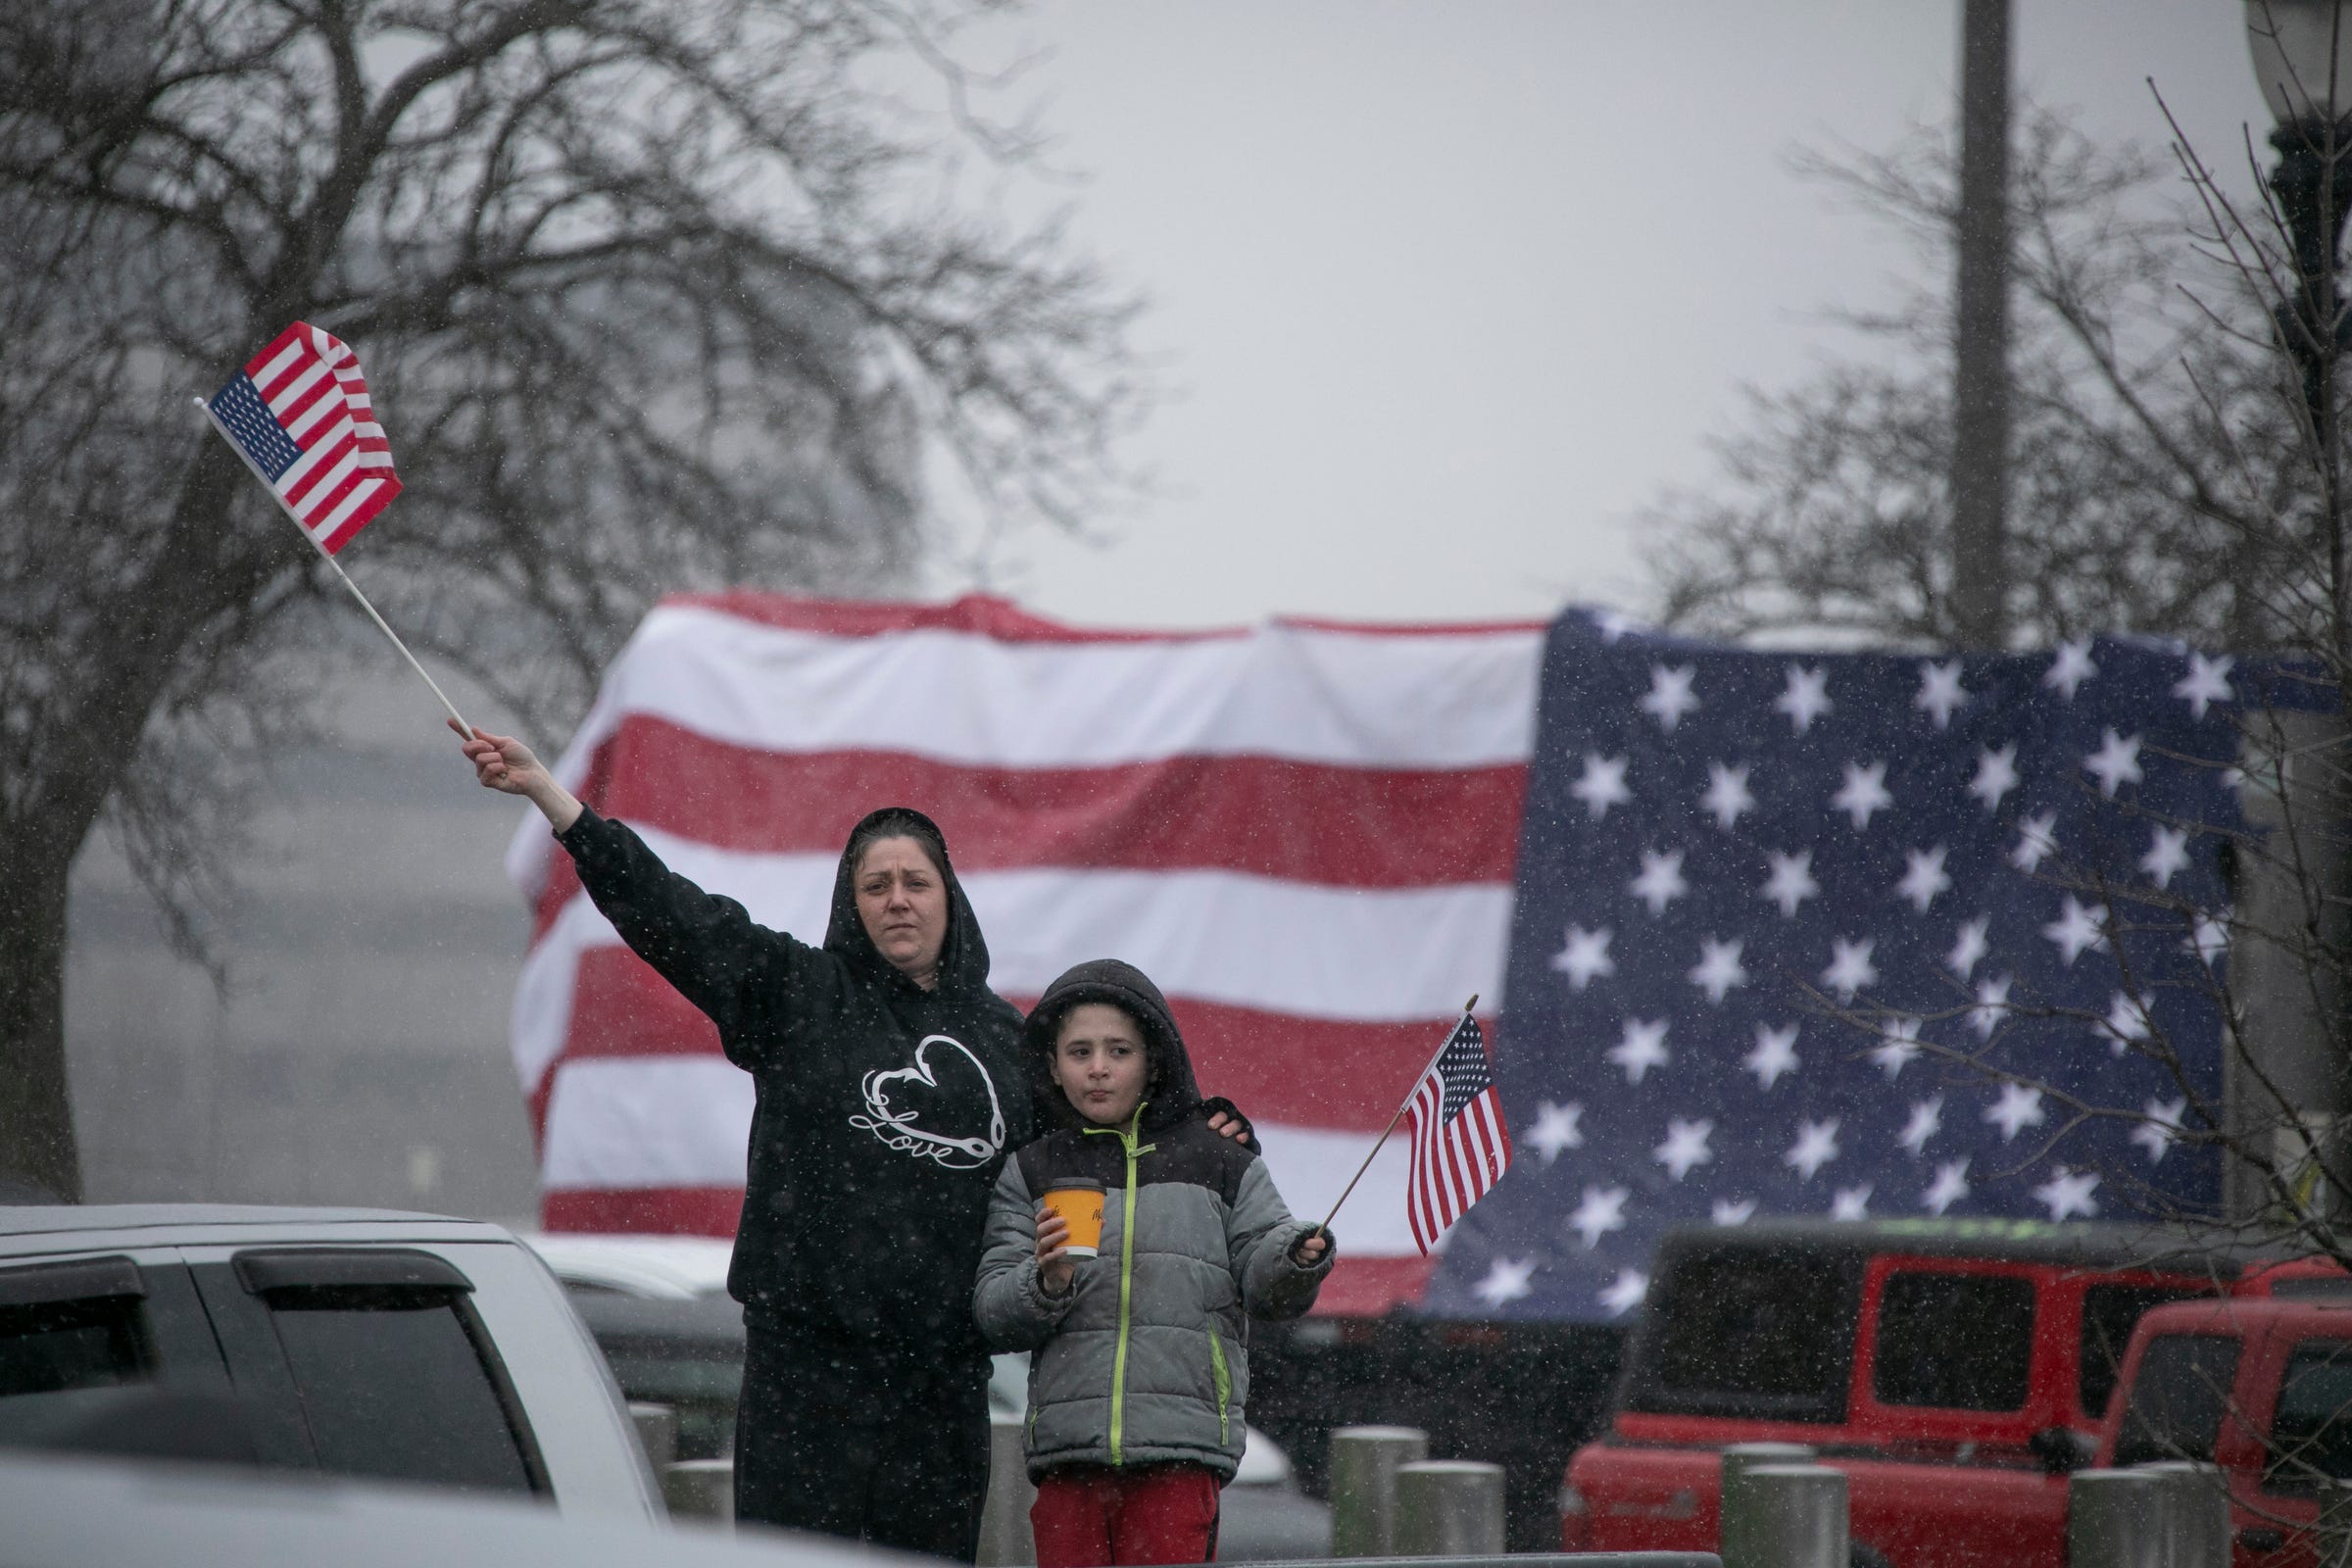 Renee Aldrich, left, and her son Gavin from Owosso join protestors as they block traffic around the Michigan State Capitol building in Lansing Wednesday, April, 15, 2020. "Gavin had his fourth grade trip to the Capitol last week that got canceled but we came anyway" said Renee Aldrich.